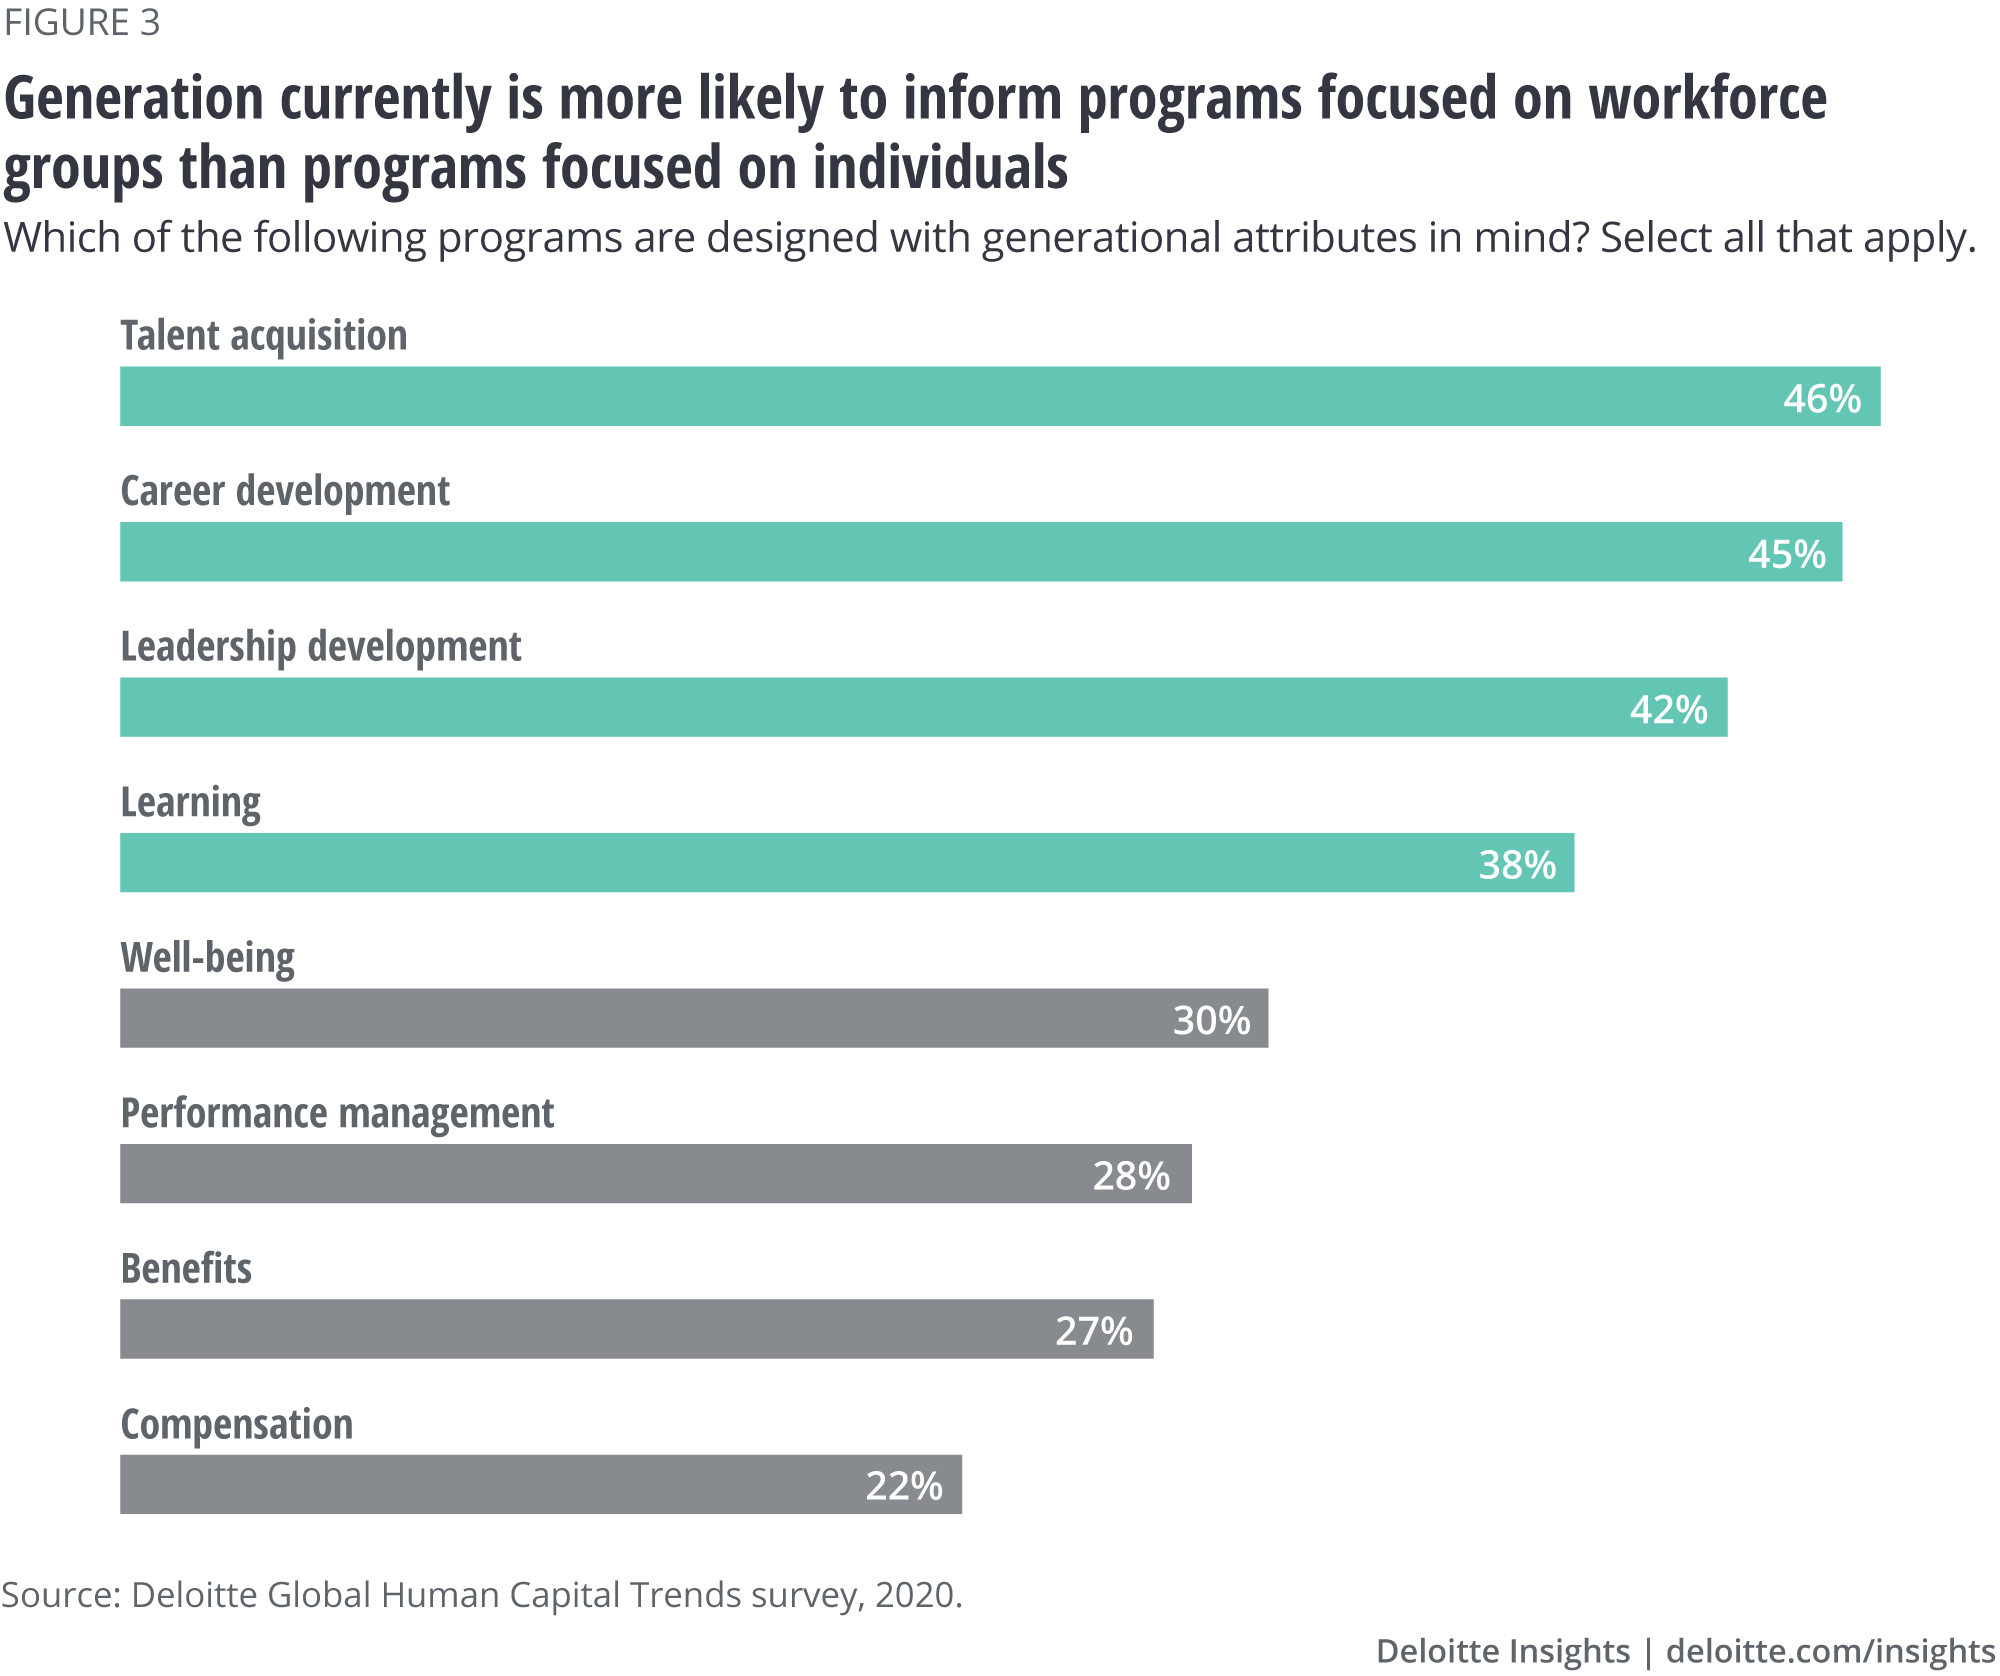 Generation currently is more likely to inform programs focused on workforce groups than programs focused on individuals